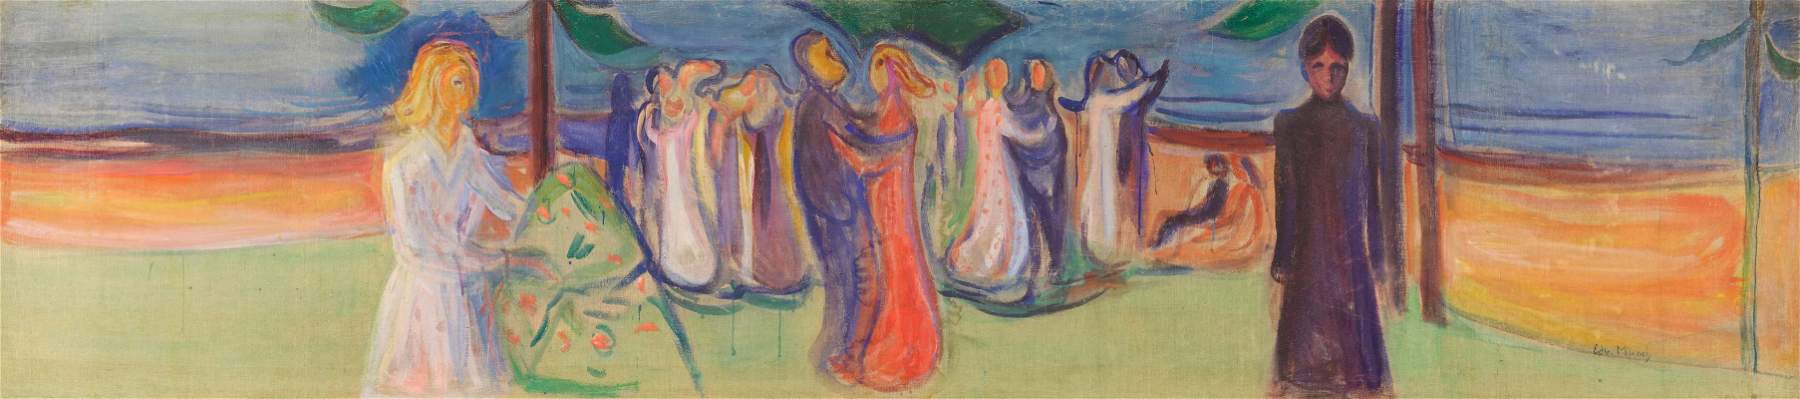 A monumental work by Edvard Munch goes up for auction at Sotheby's: it's the Dance on the Beach